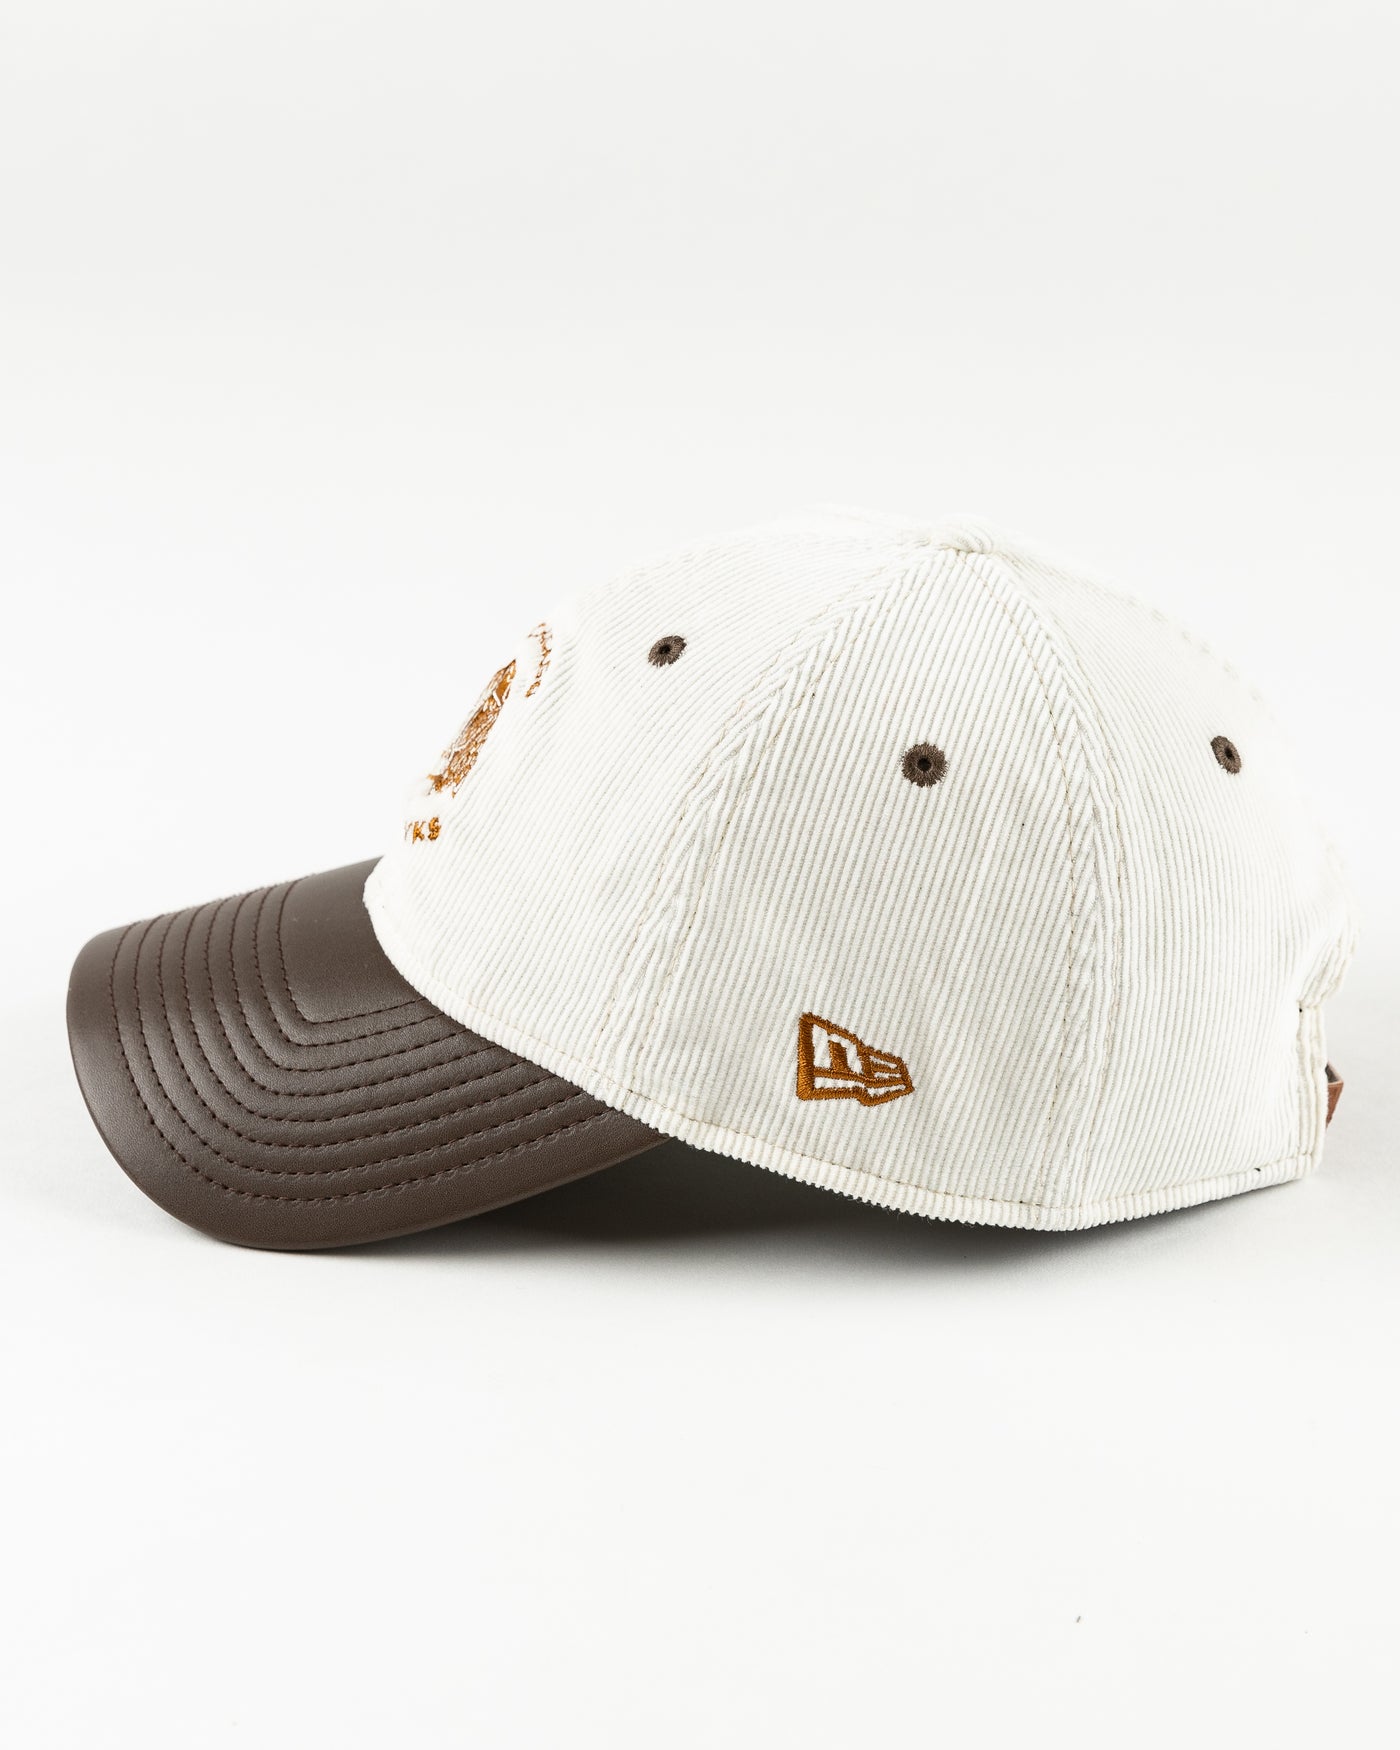 cream and brown New Era adjustable cap with tonal Chicago Blackhawks logo - right side lay flat